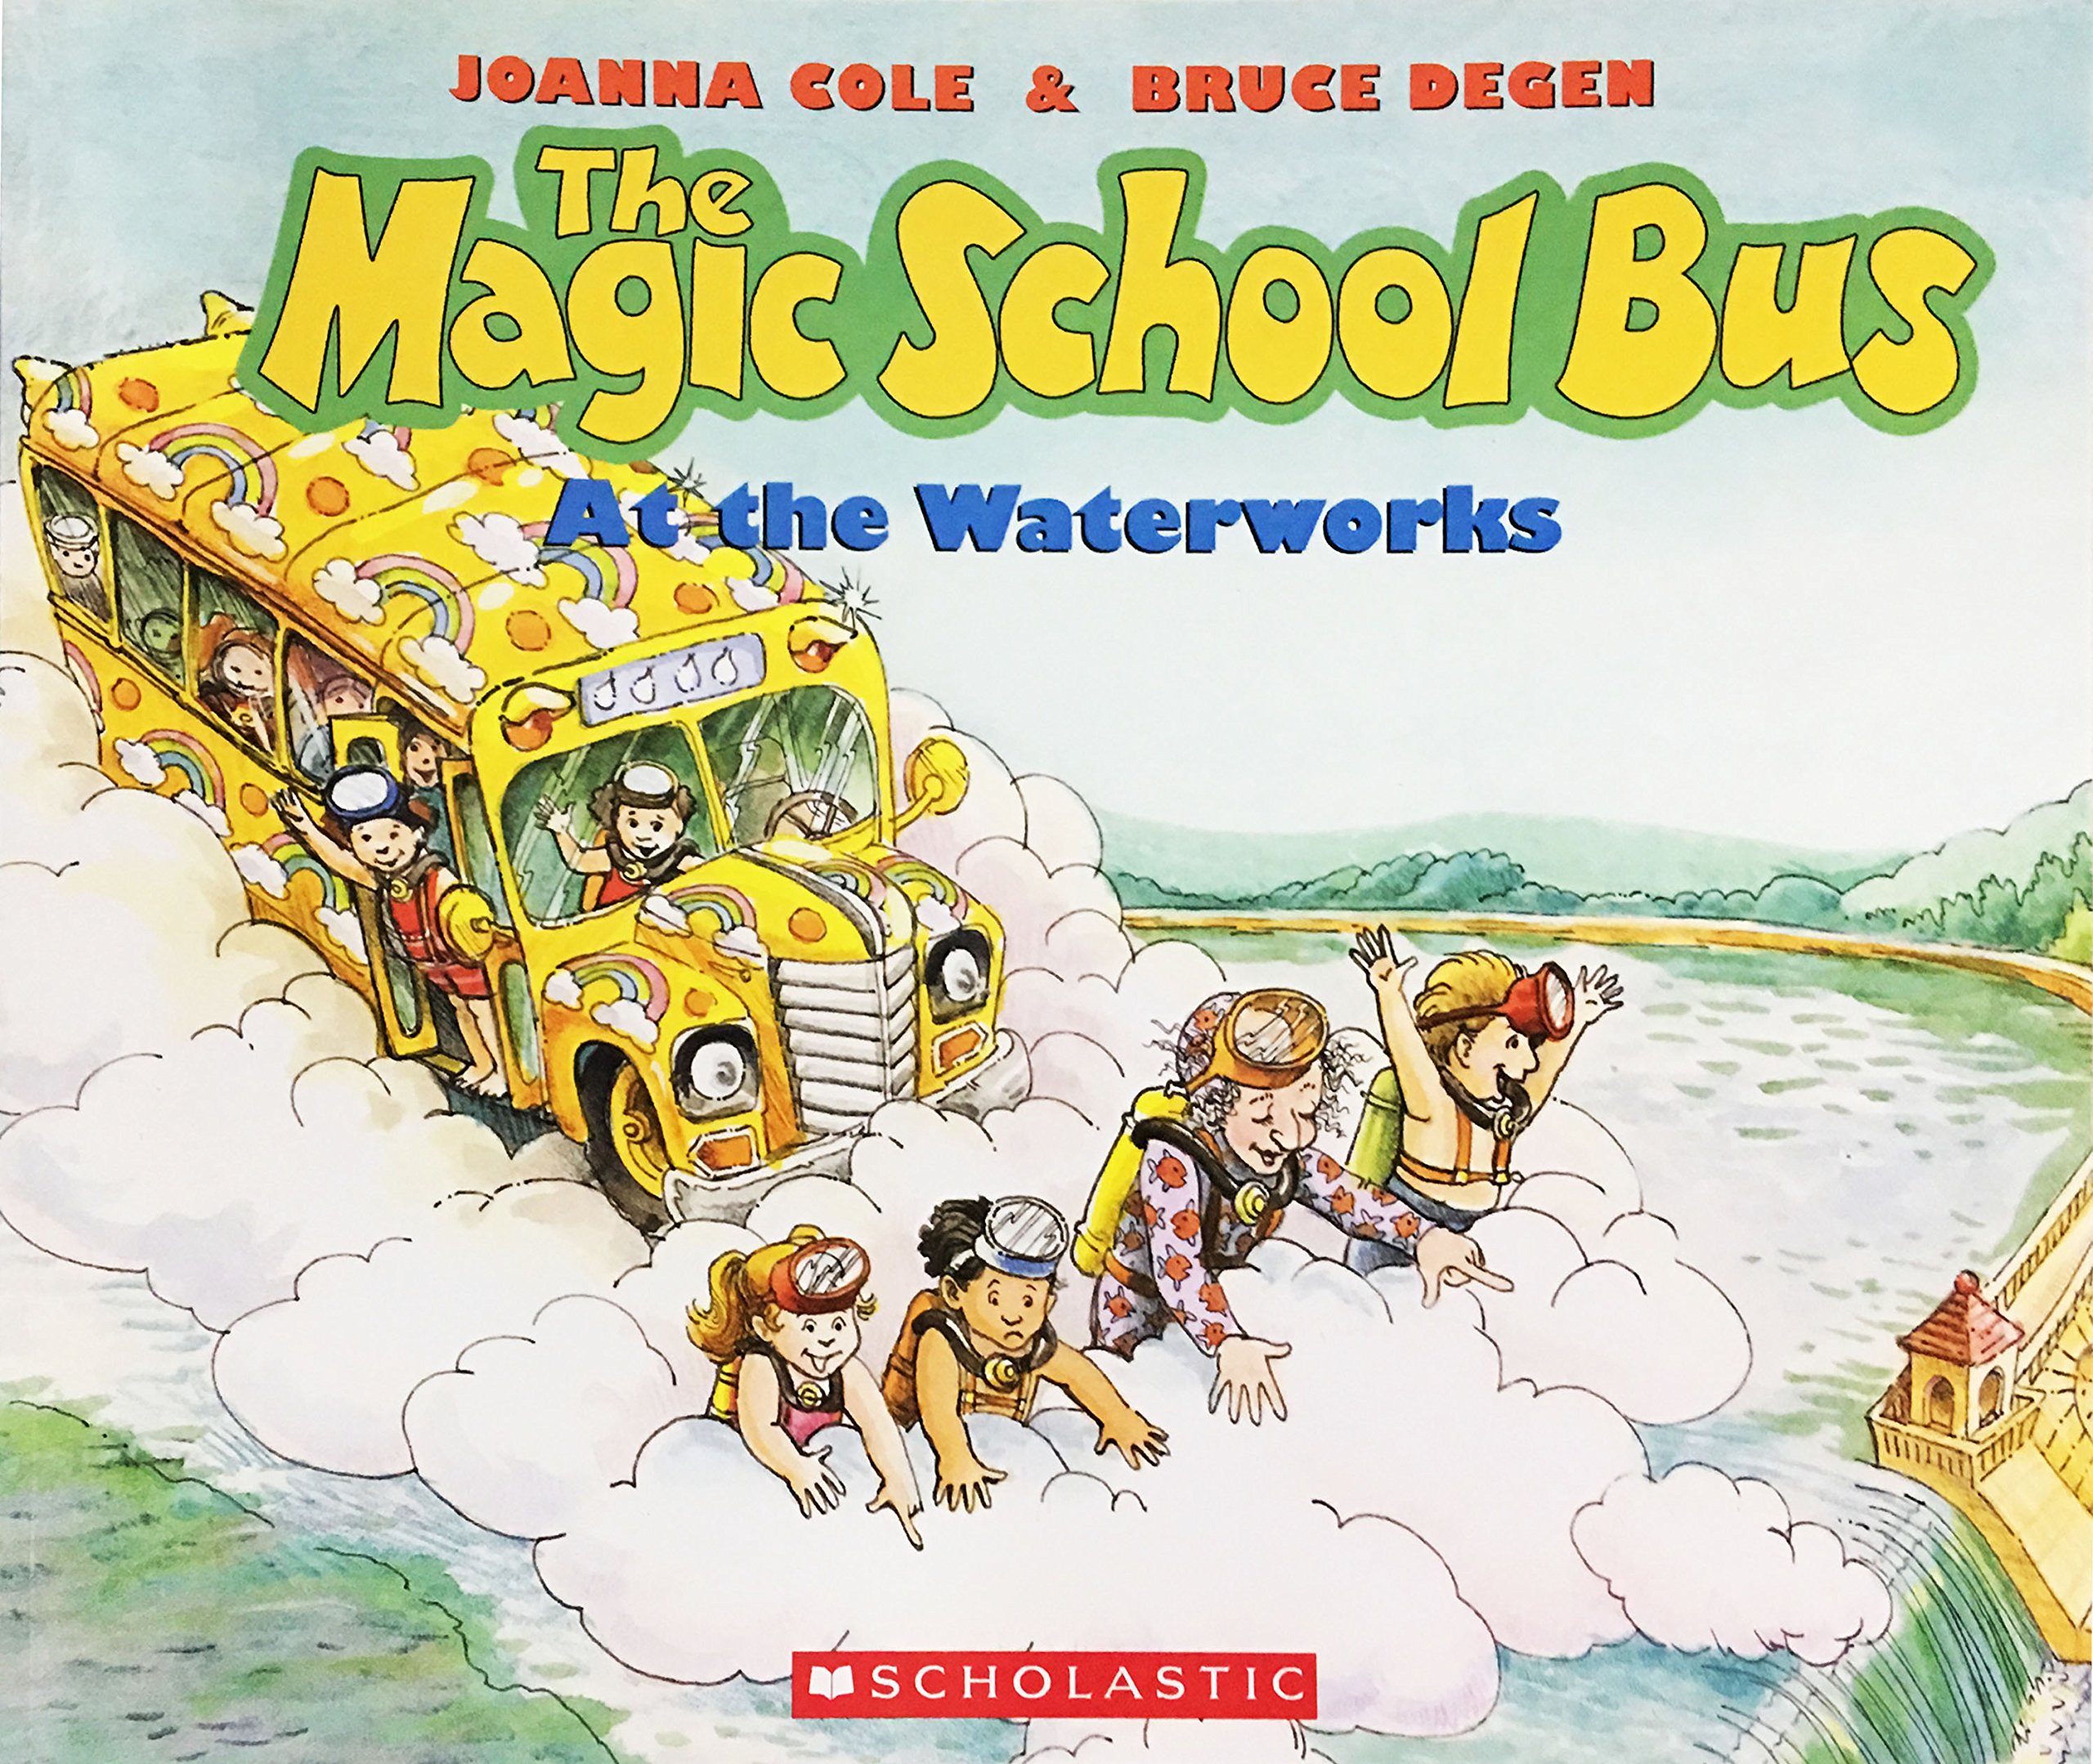 The Magic School Bus at the Waterworks by Joanna Cole book cover